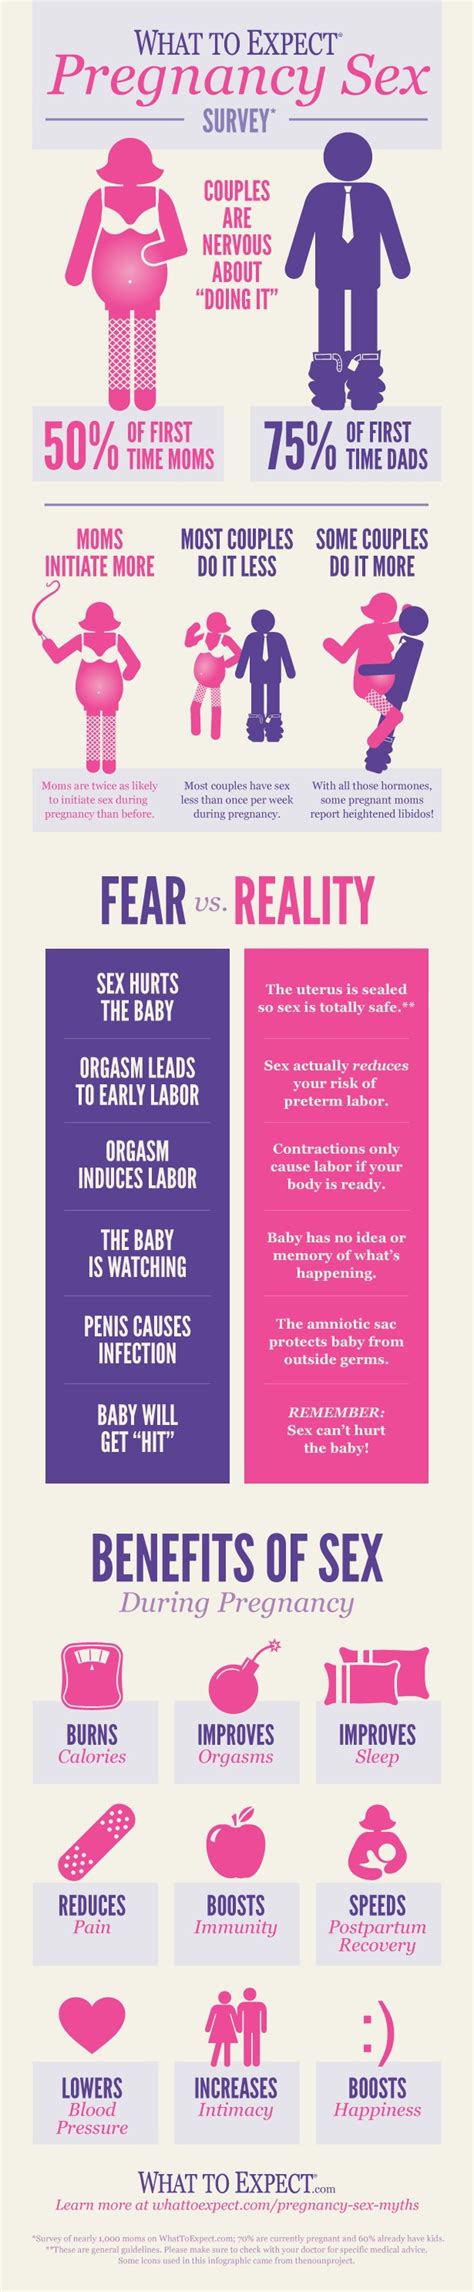 sex during pregnancy a survey [infographic]